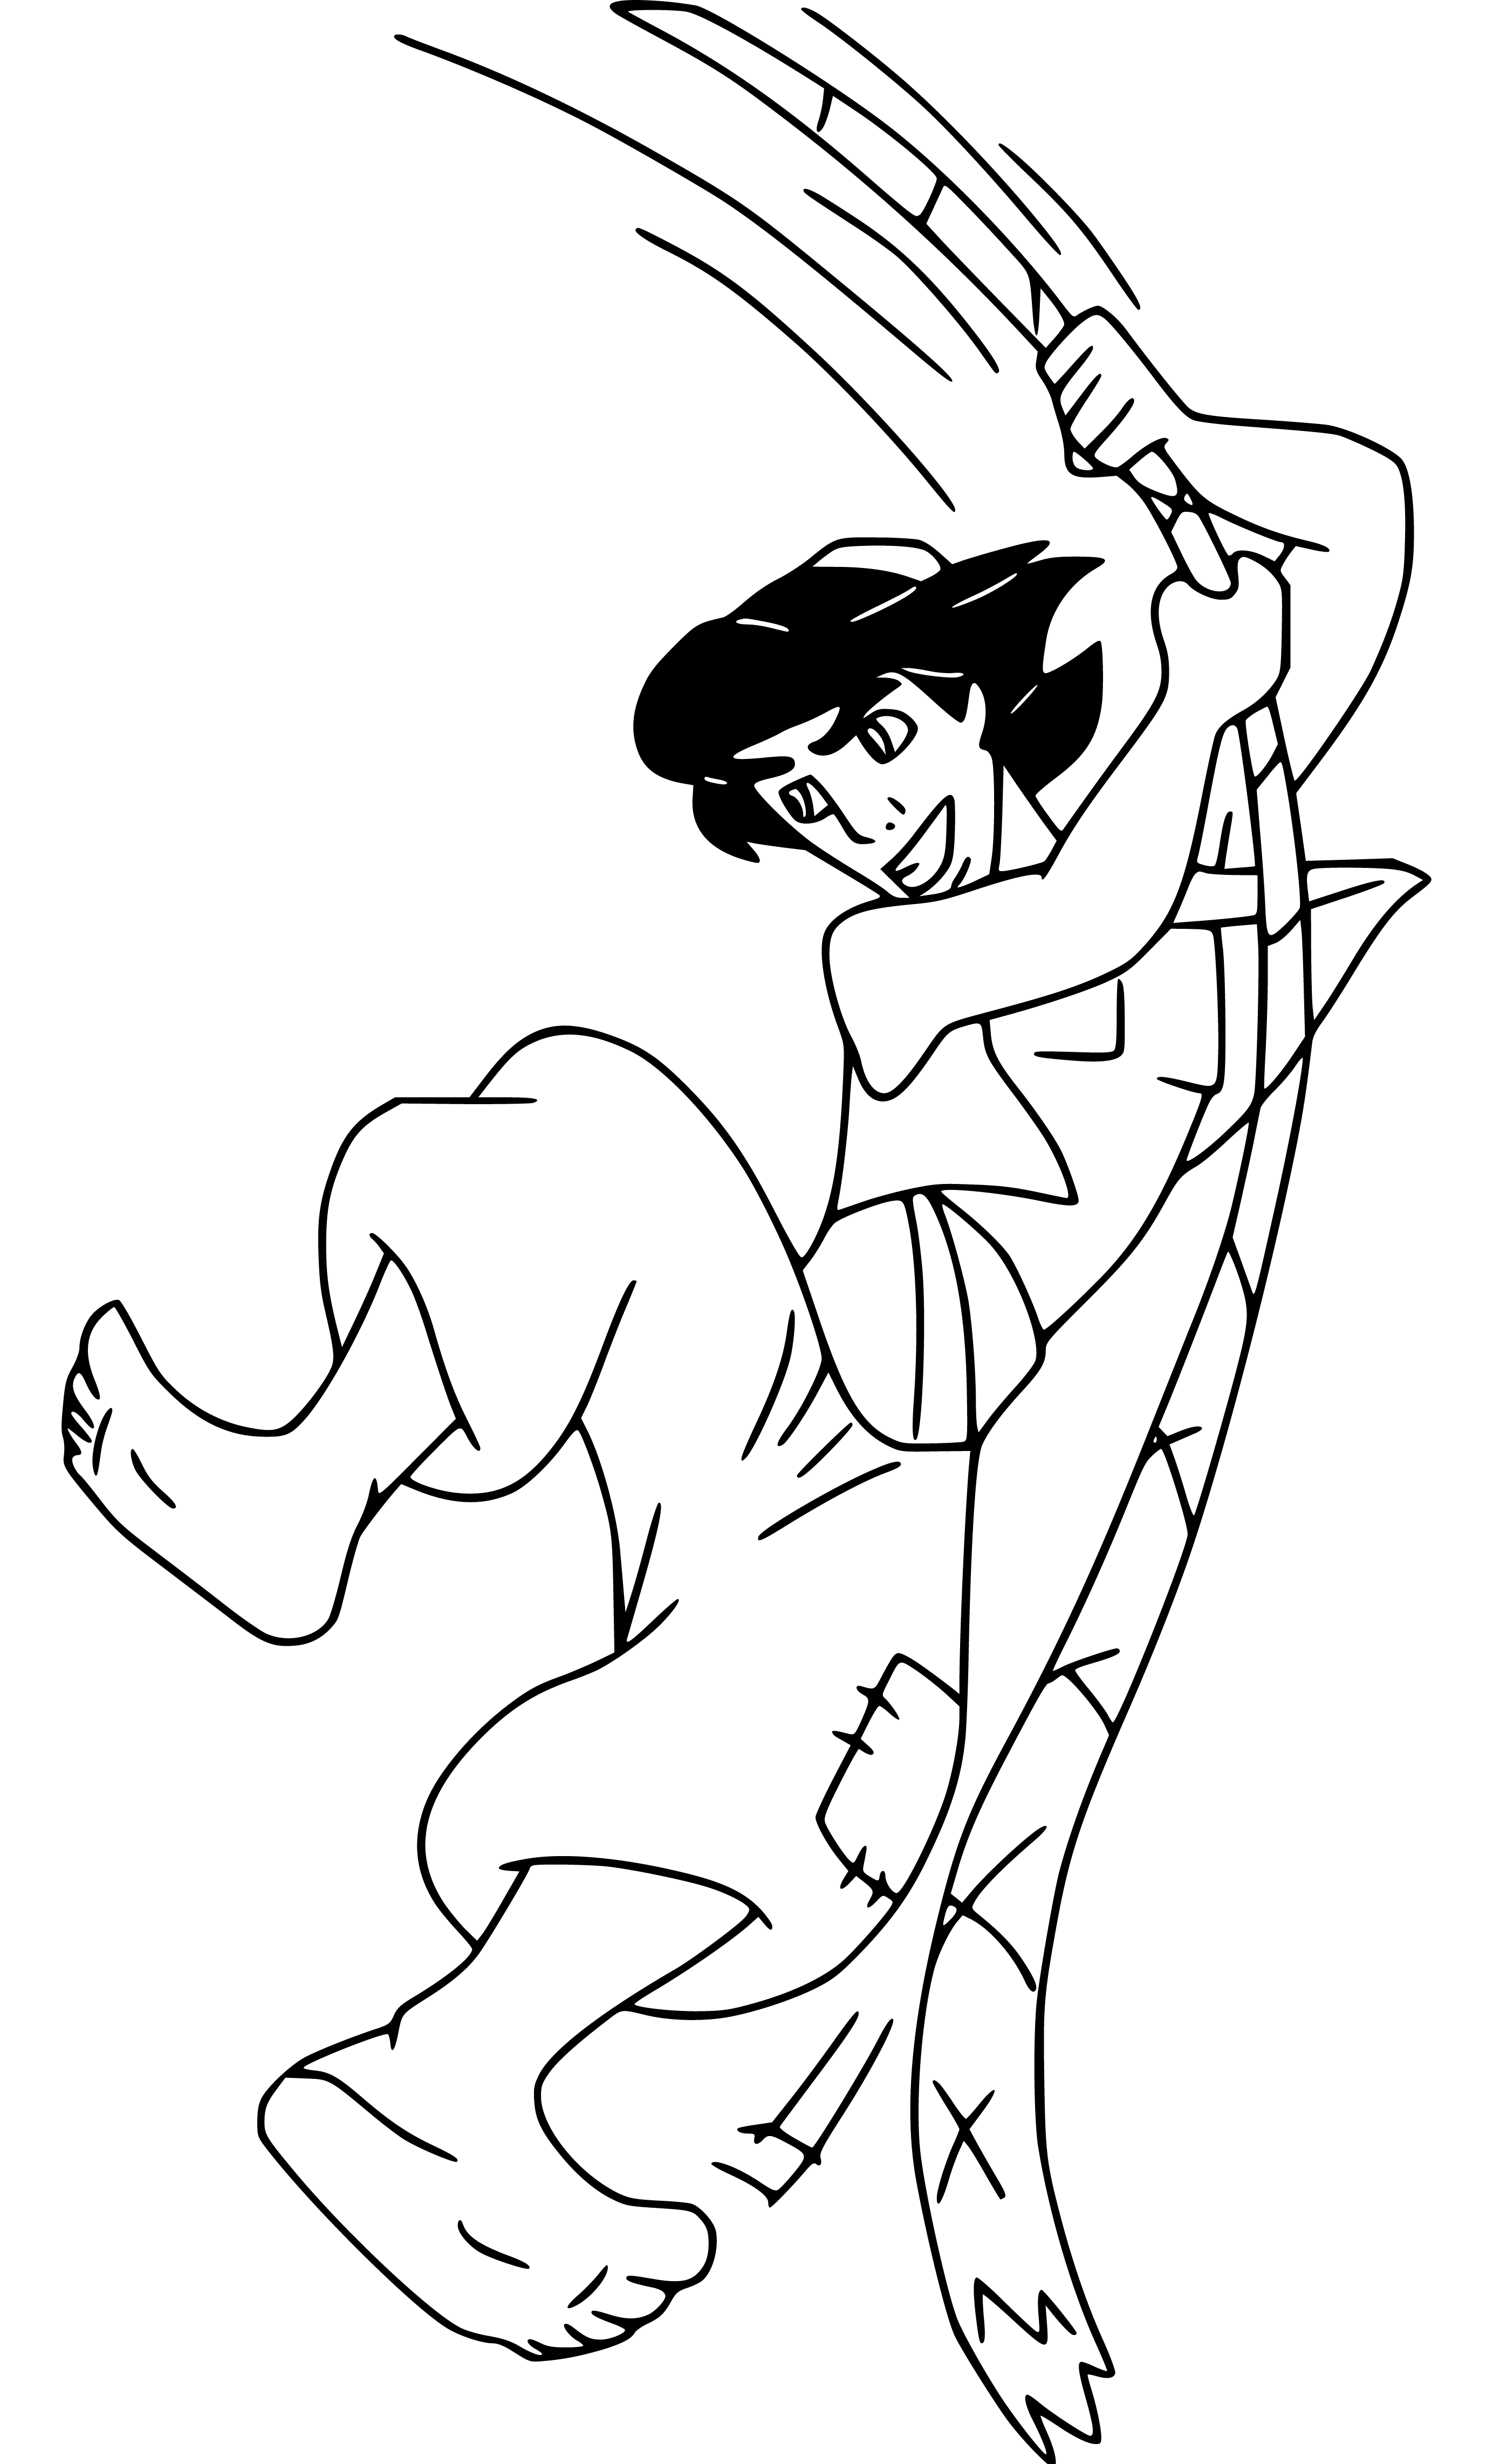 Prince Aladdin to color Coloring Page Printable for Kids, Free, Simple and Easy, as PDF